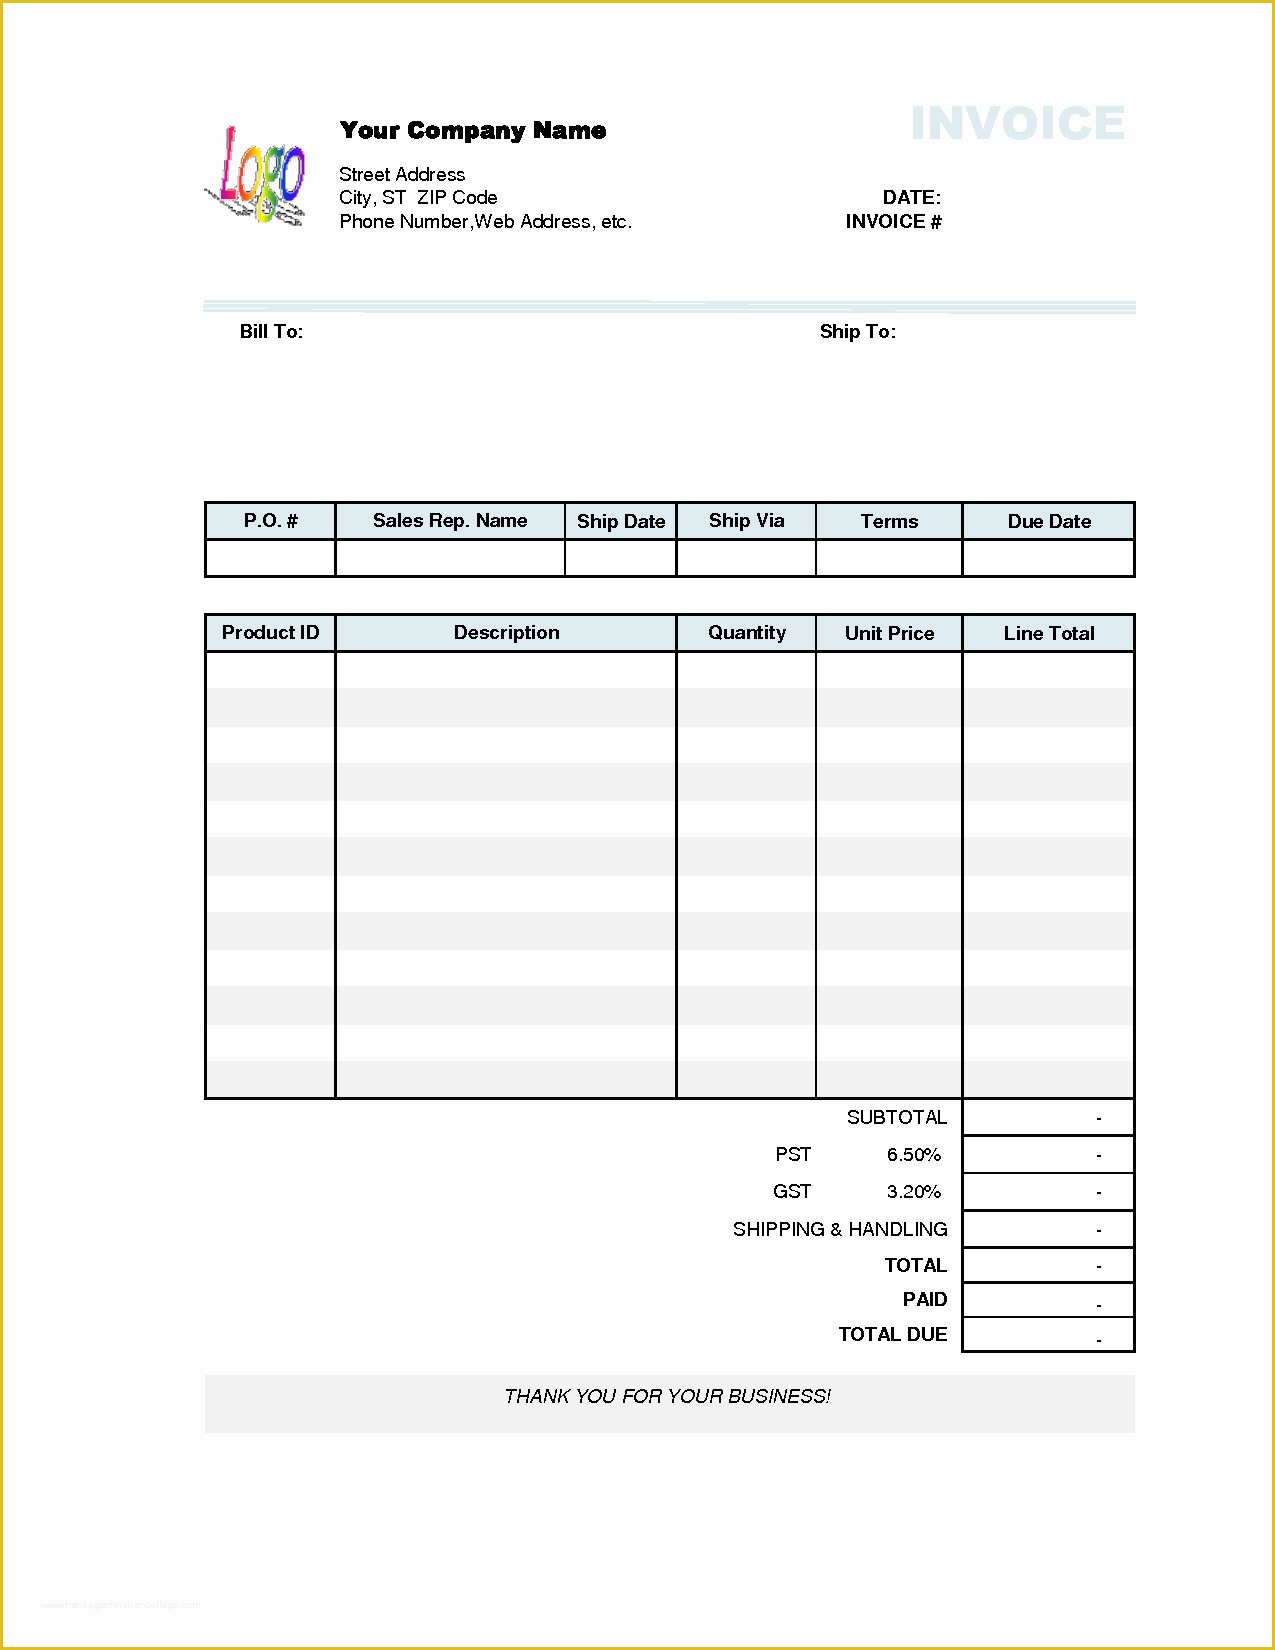 Free Printable Business Invoice Template Of Business Invoice Template